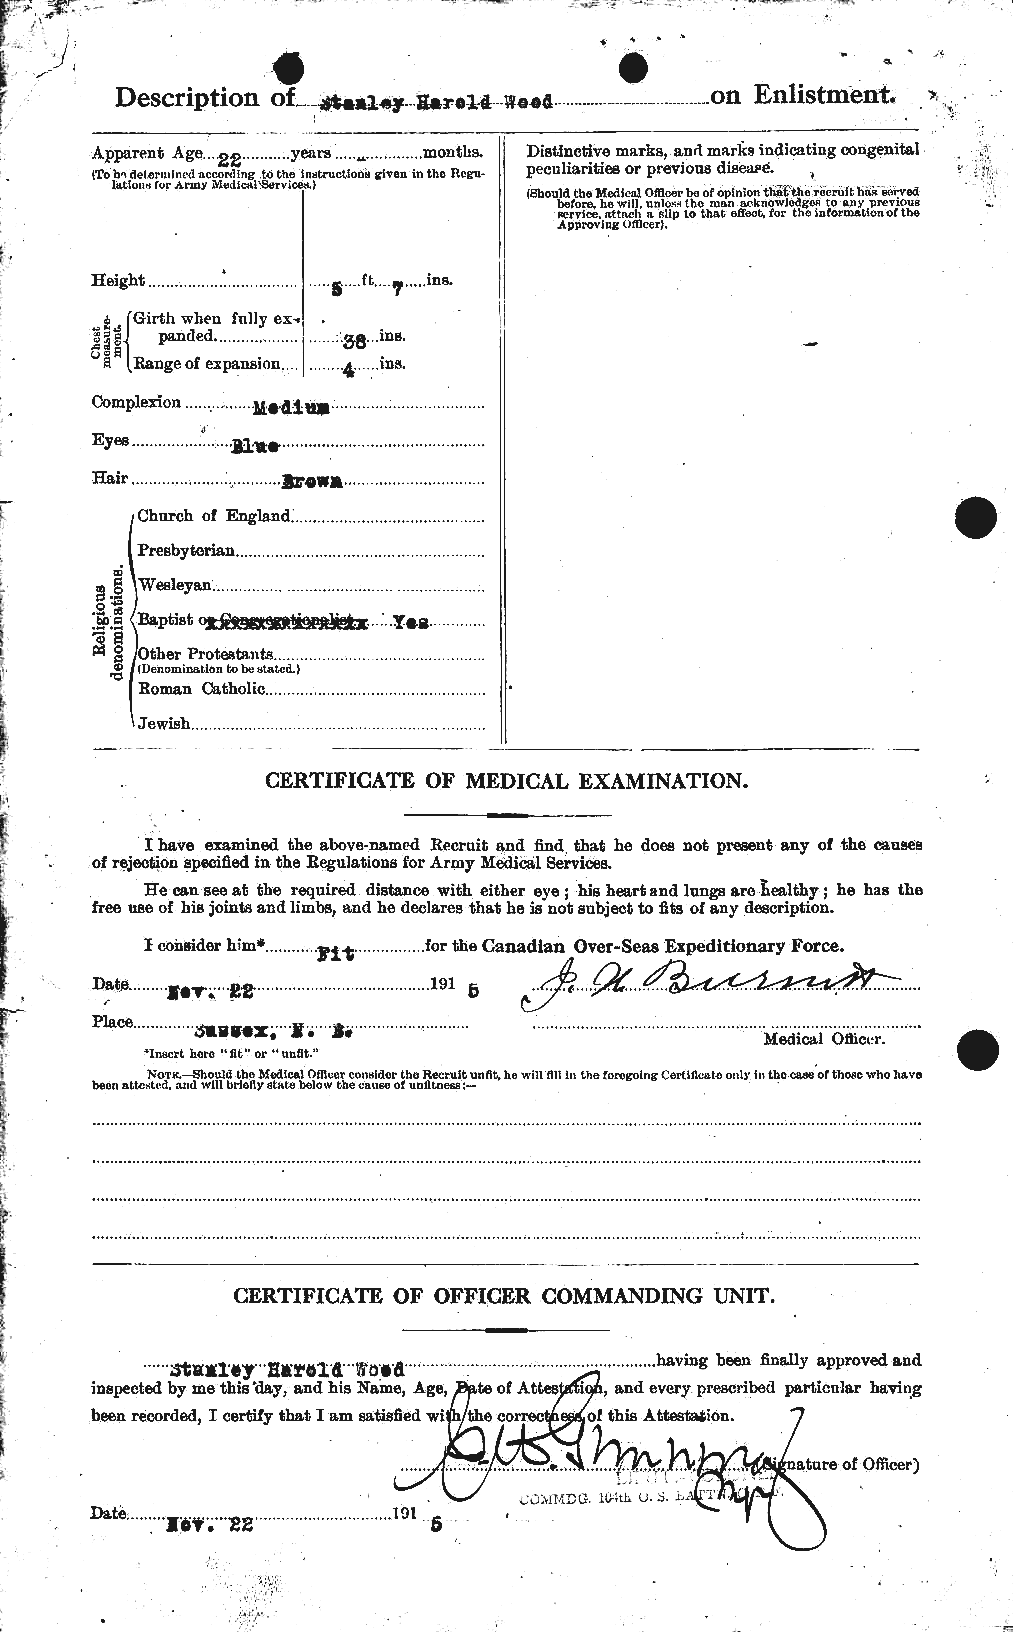 Personnel Records of the First World War - CEF 684824b